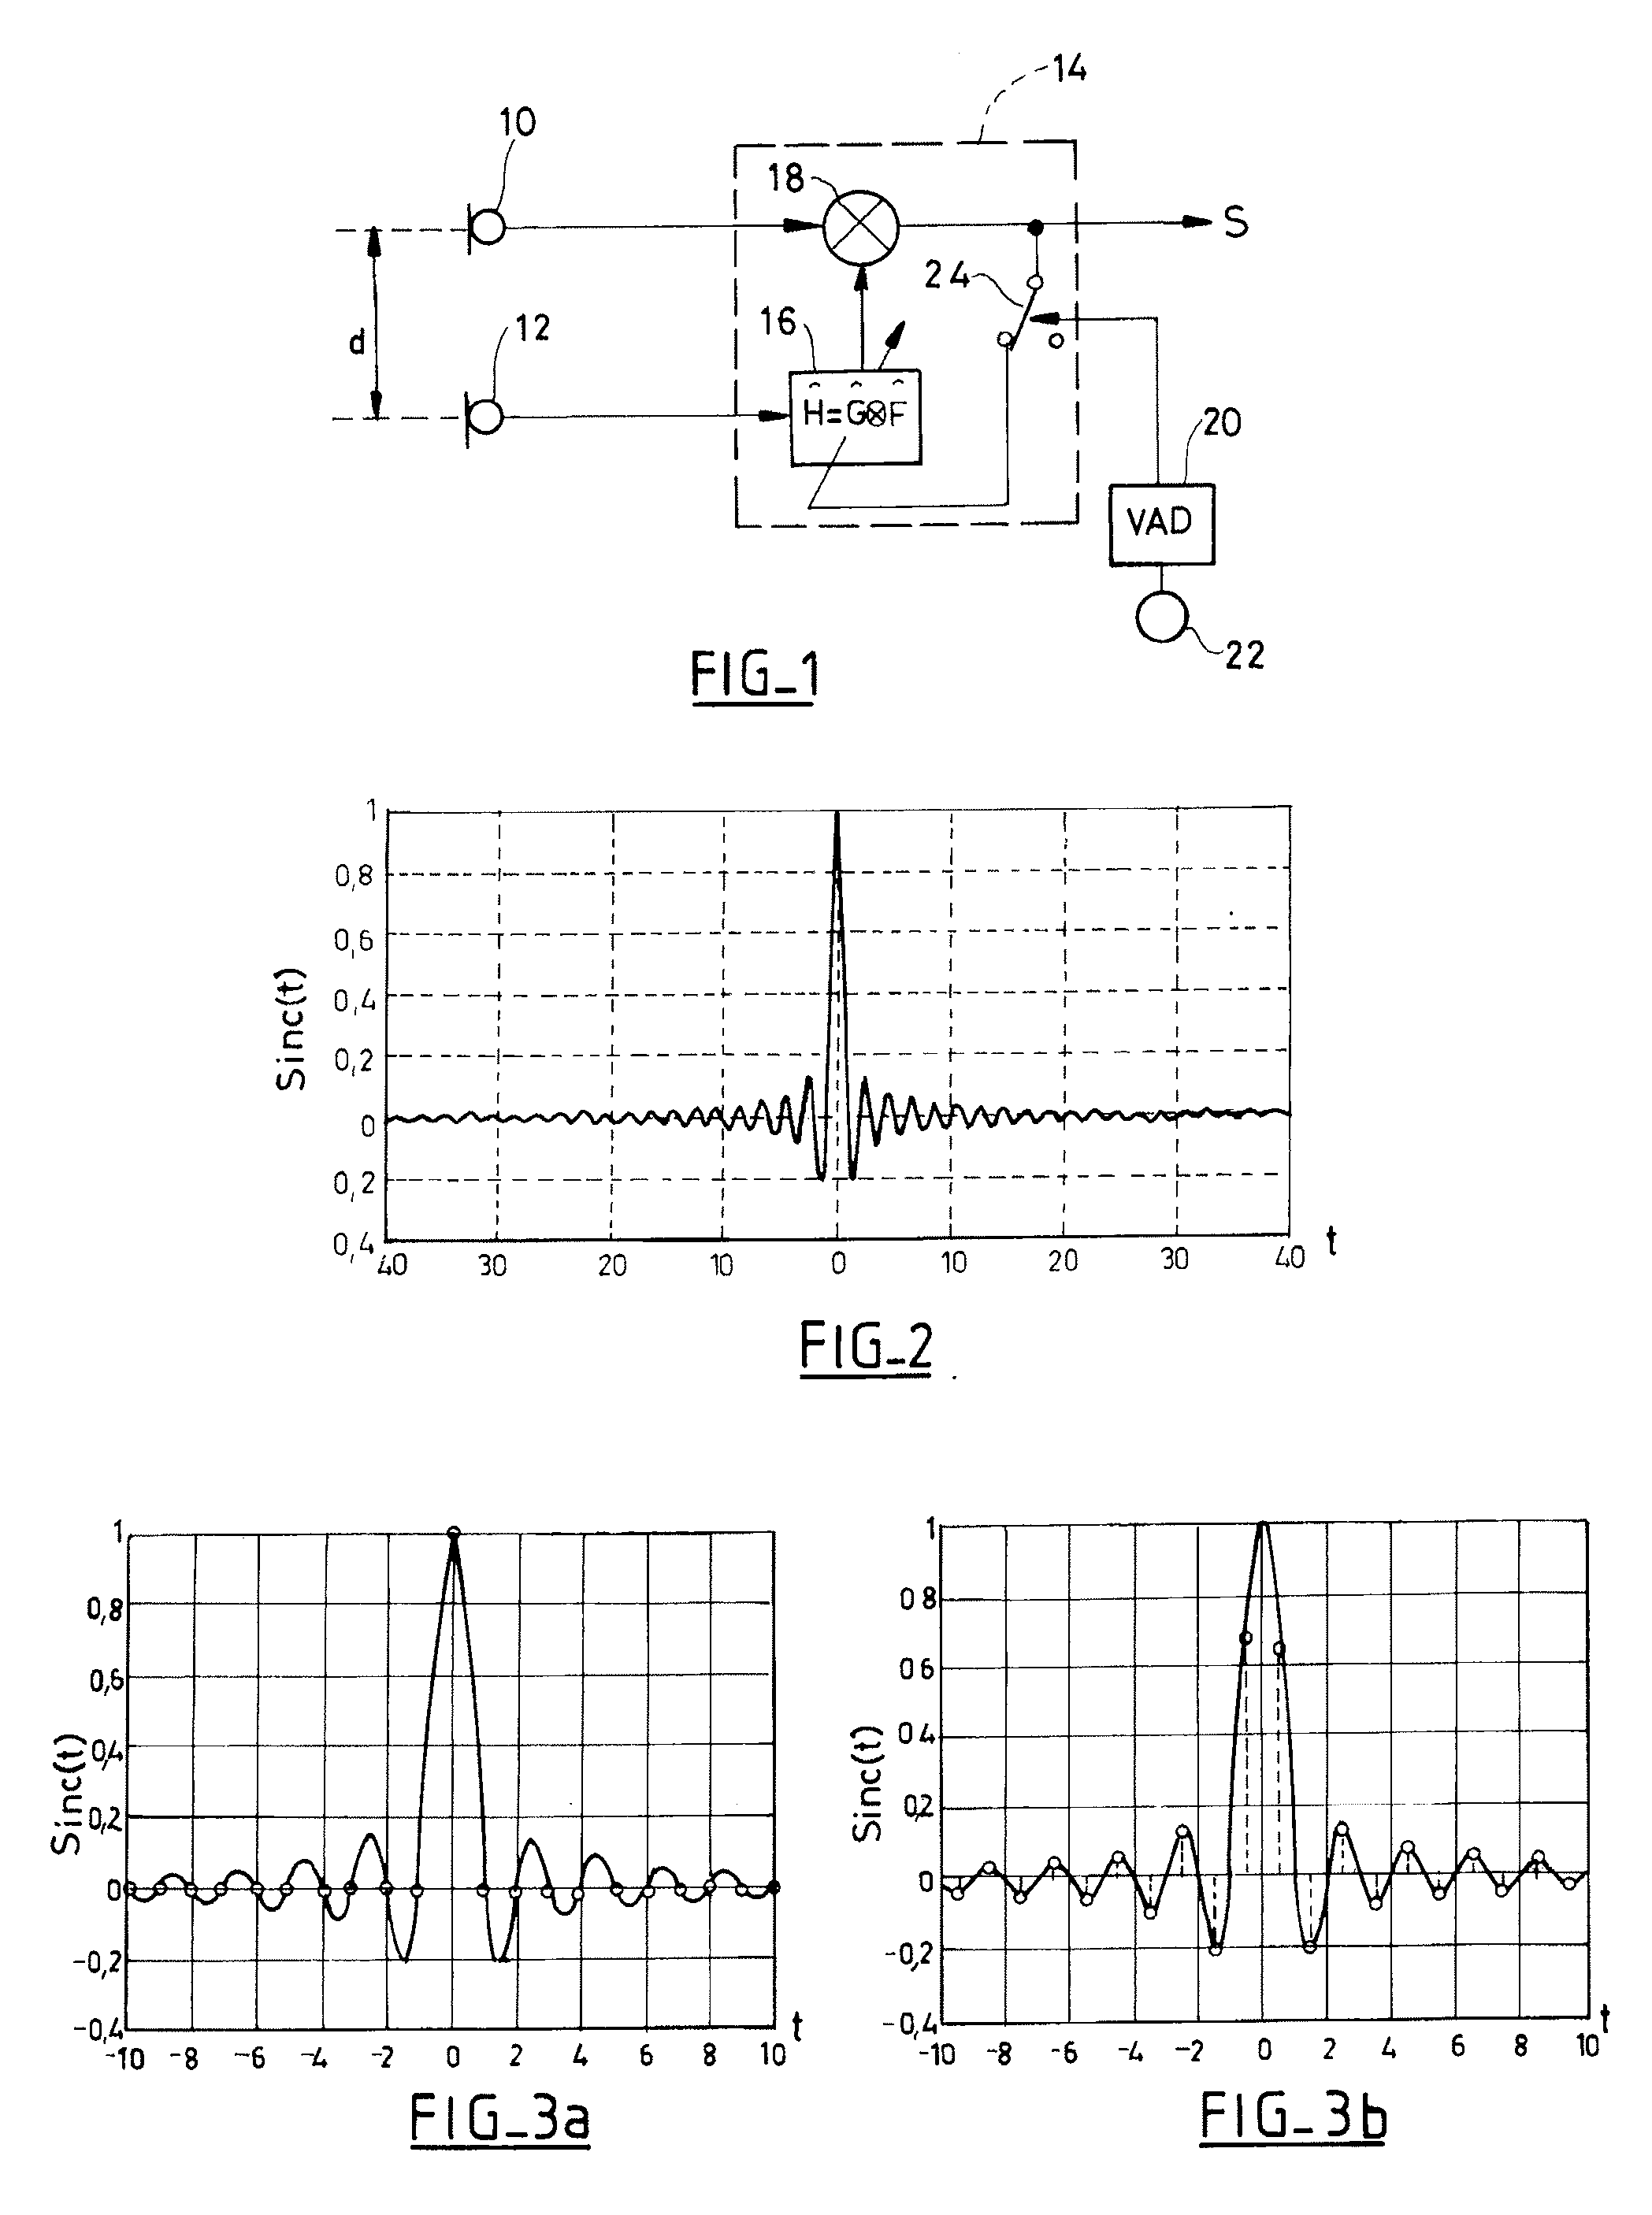 Audio equipment including means for de-noising a speech signal by fractional delay filtering, in particular for a "hands-free" telephony system